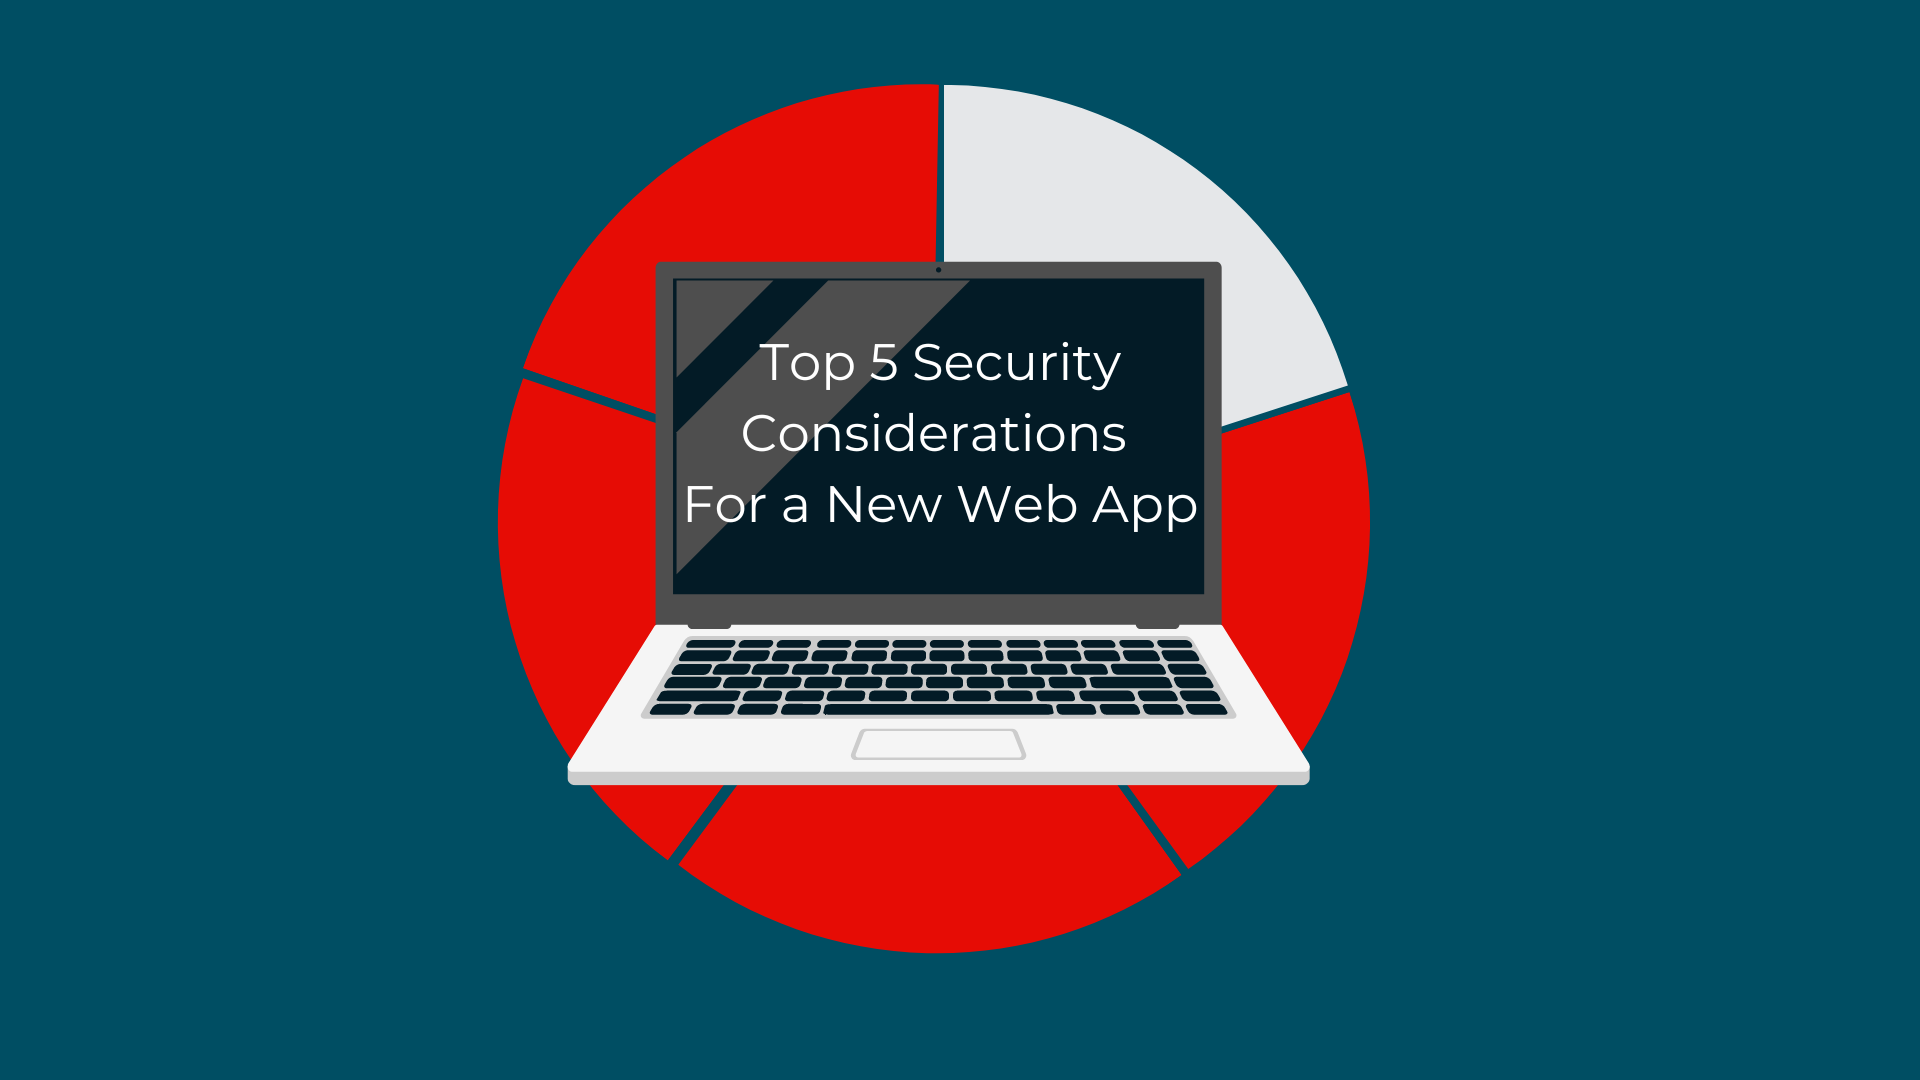 Top 5 Security Considerations: 1. Secure Coding